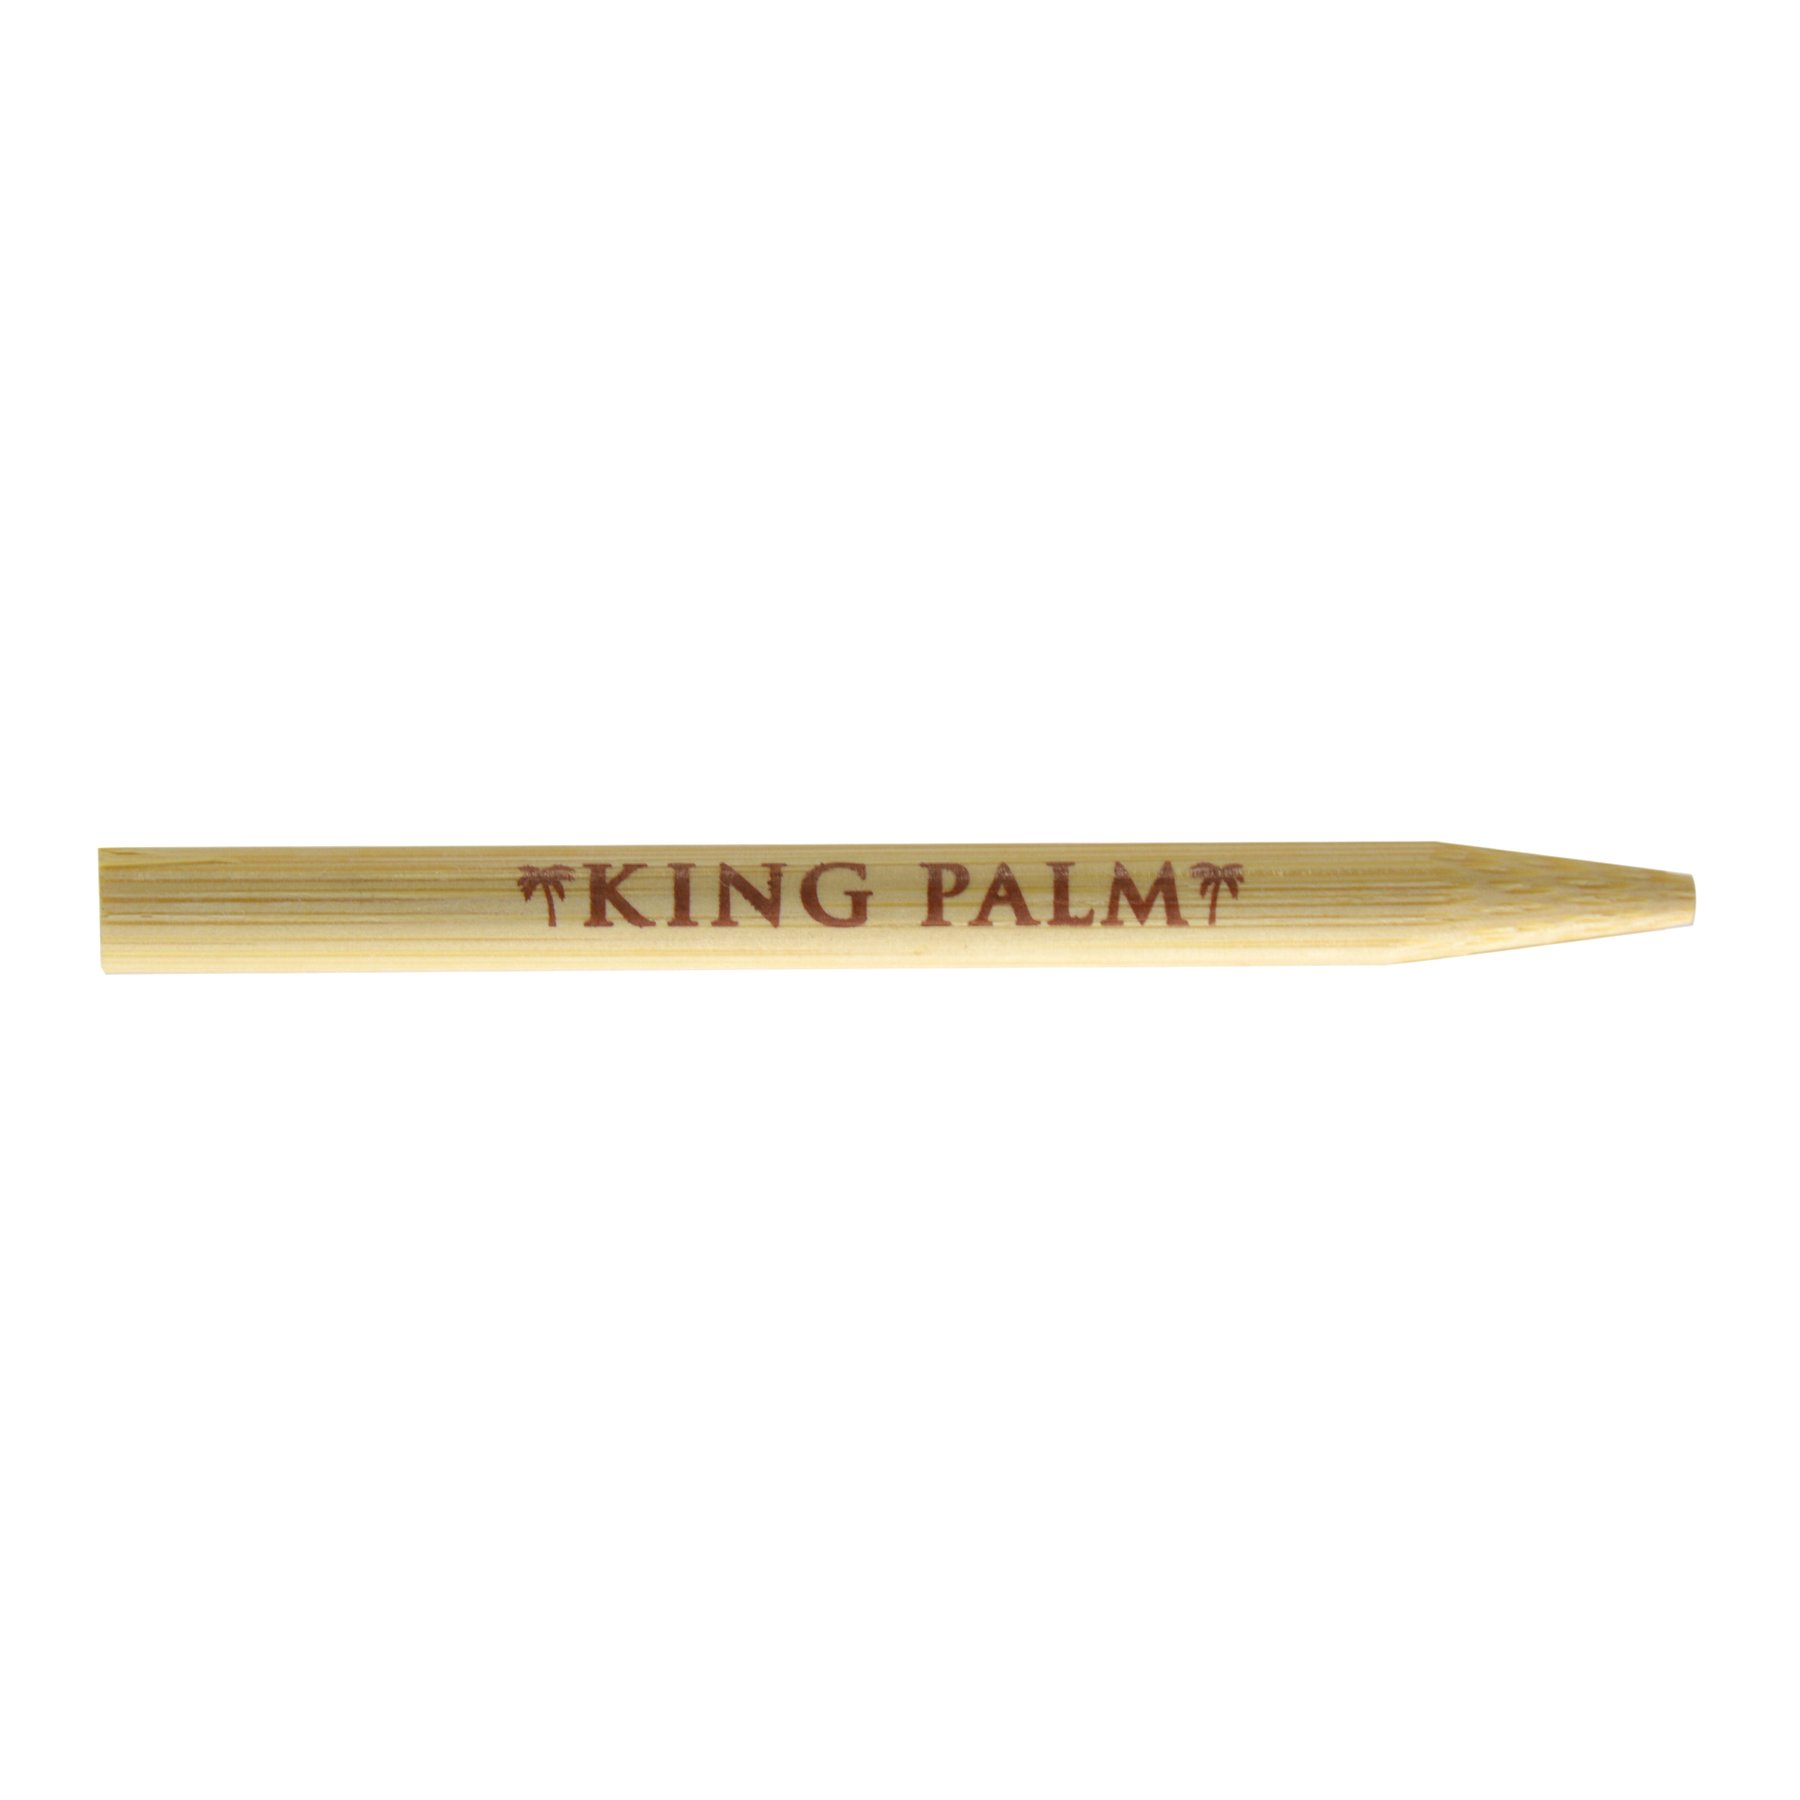 KING PALM | 'Retail Display' Natural Leaf Mini Rolls Blunt Wraps | 85mm - Fruit Passion - 20 Count - 5